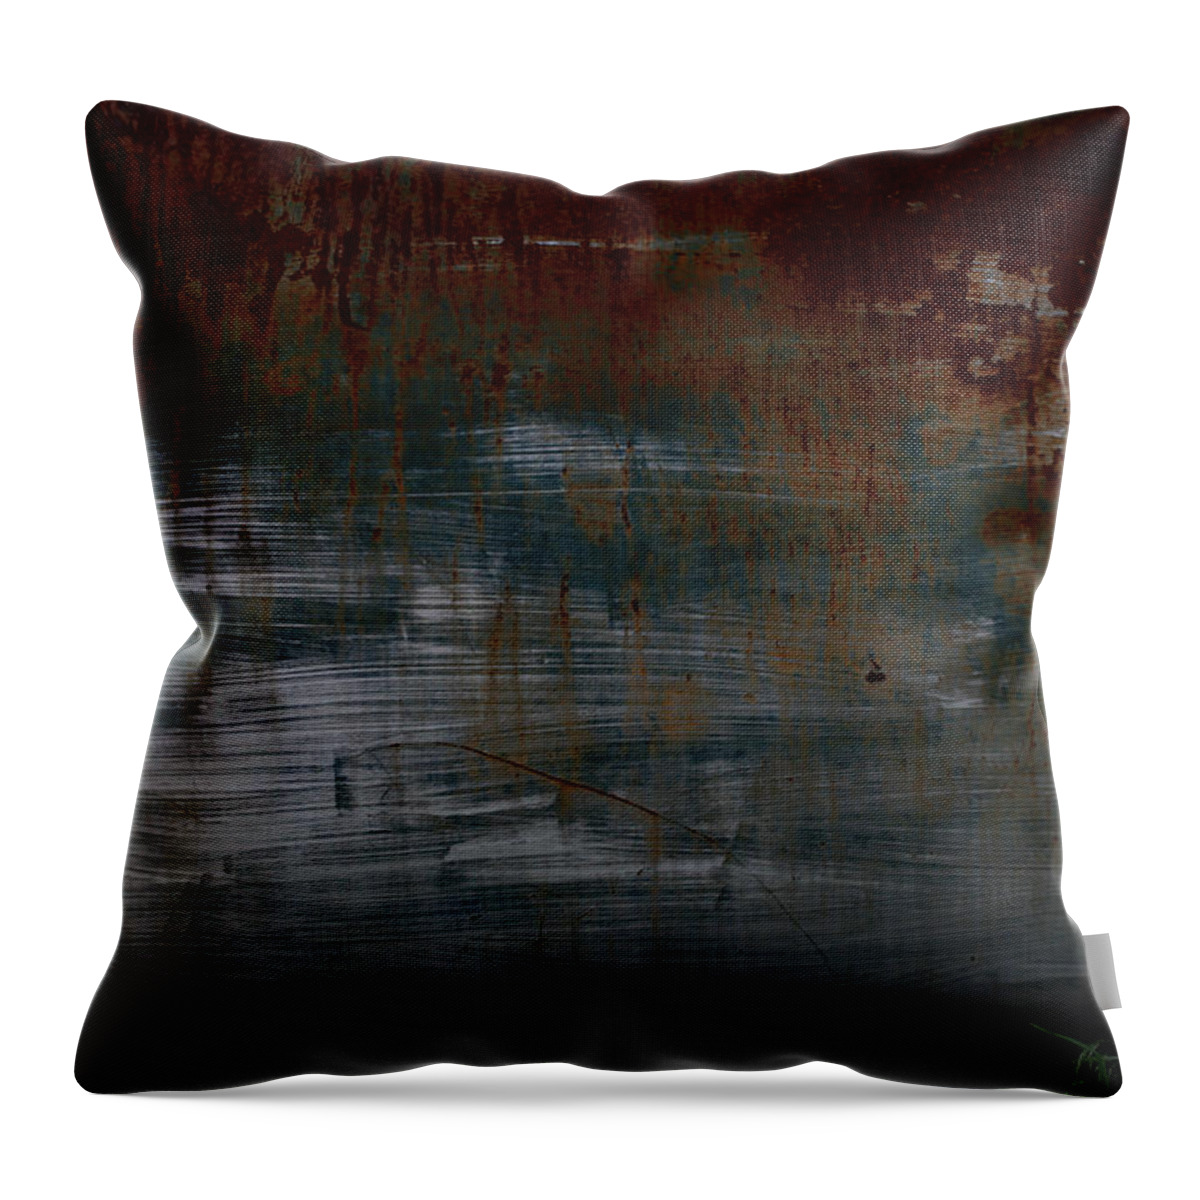 Vintage Rusted Chevrolet Truck Throw Pillow featuring the photograph Vintage Rusted Chevy Door by Toni Hopper